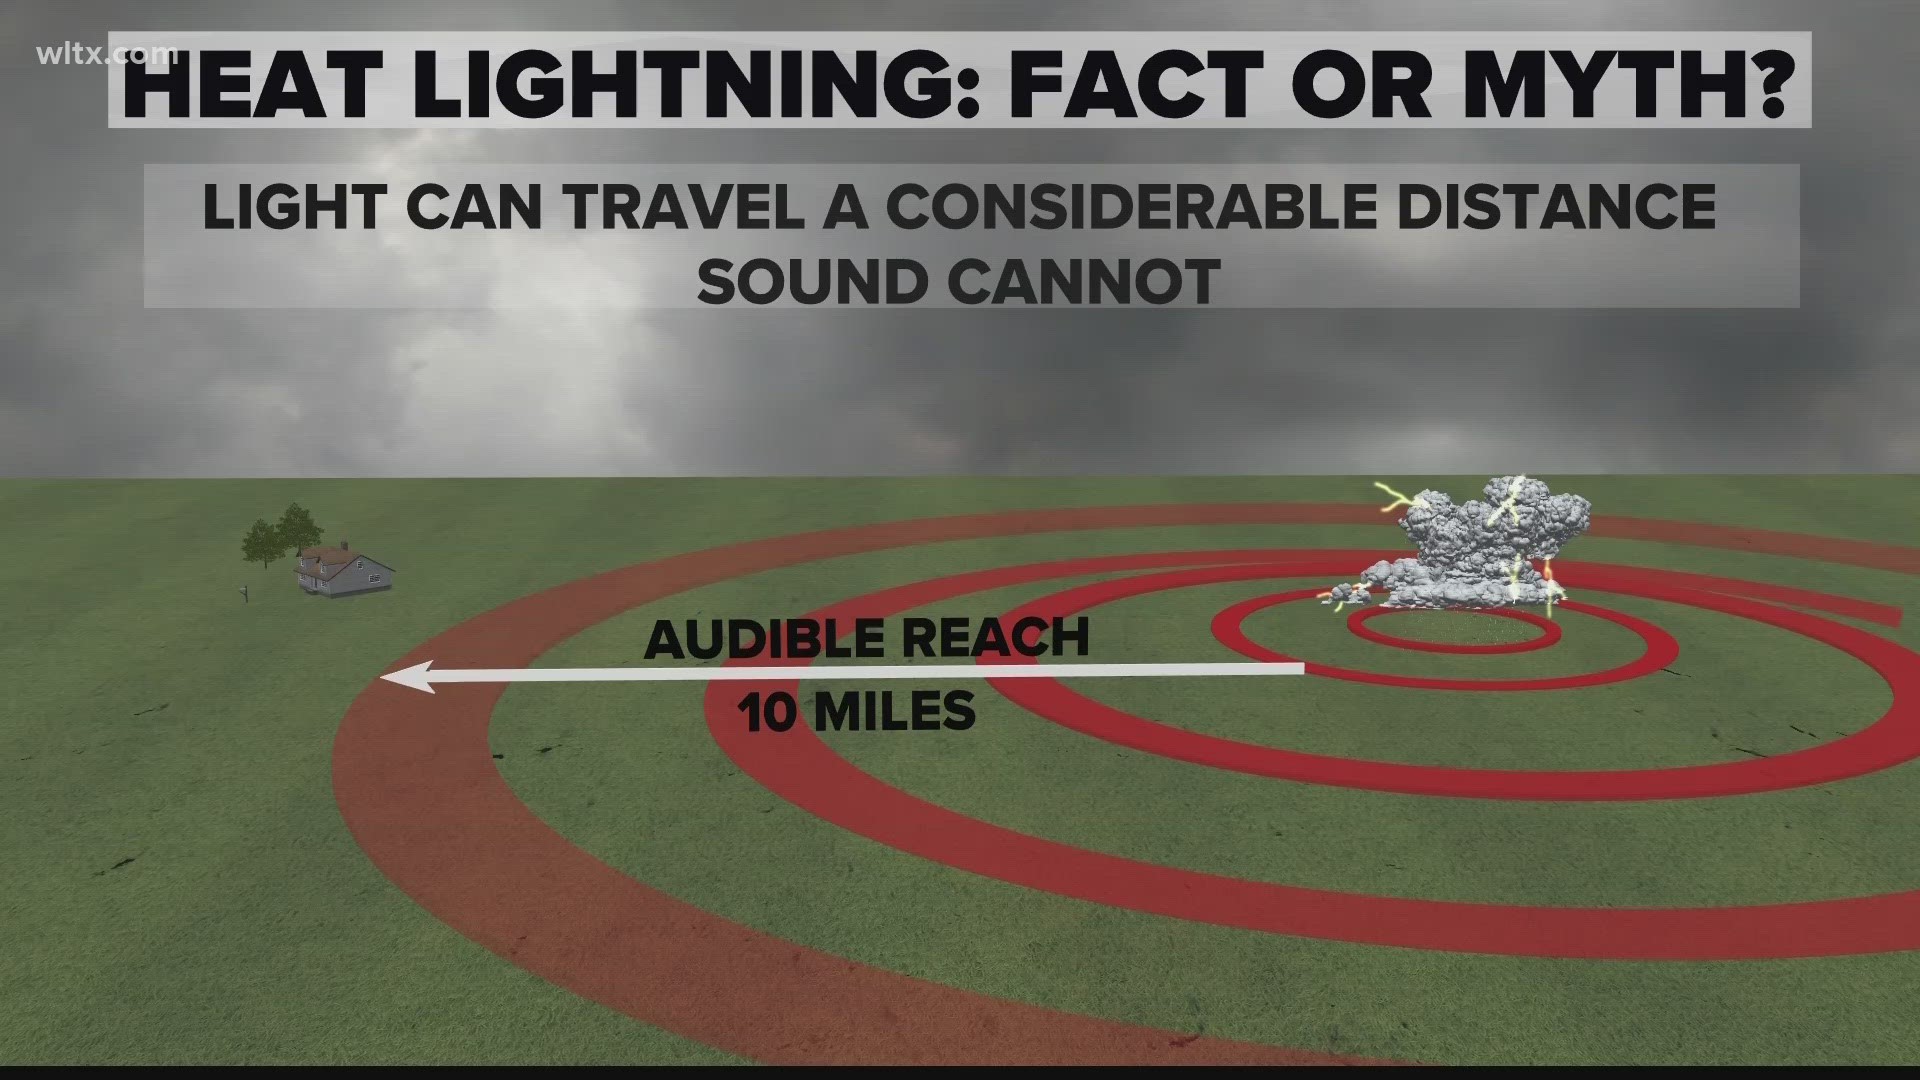 “Heat lightning” is a known summer phenomenon when lightning illuminates the night sky without an accompanying rumble of thunder.